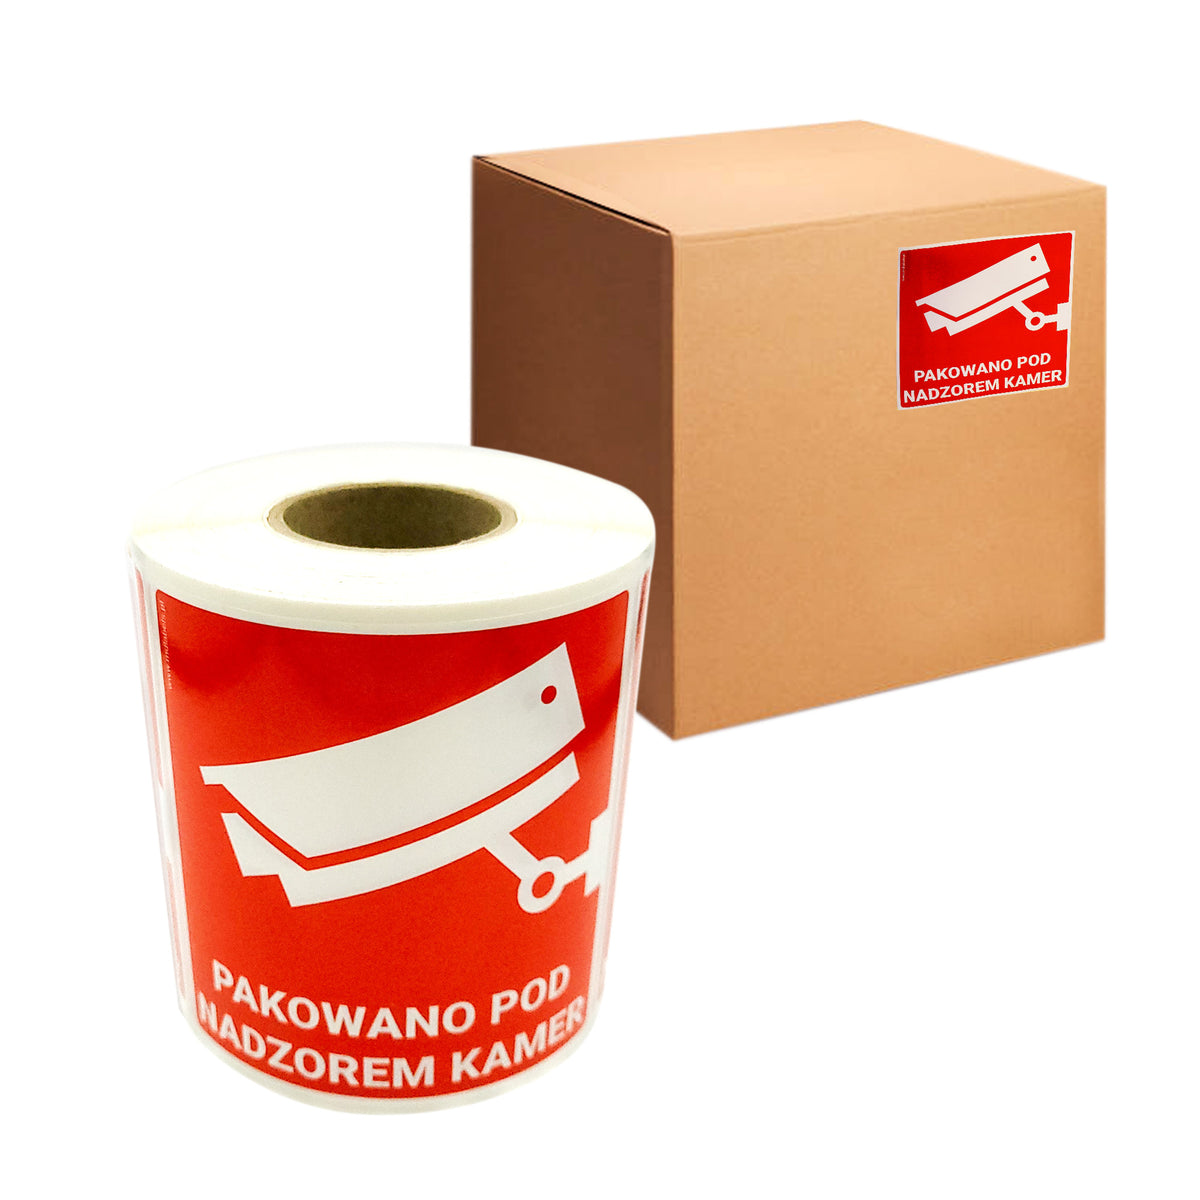 Self-adhesive warning labels - PP FILM- Packaged under camera surveillance! - 98x98mm 500 per roll